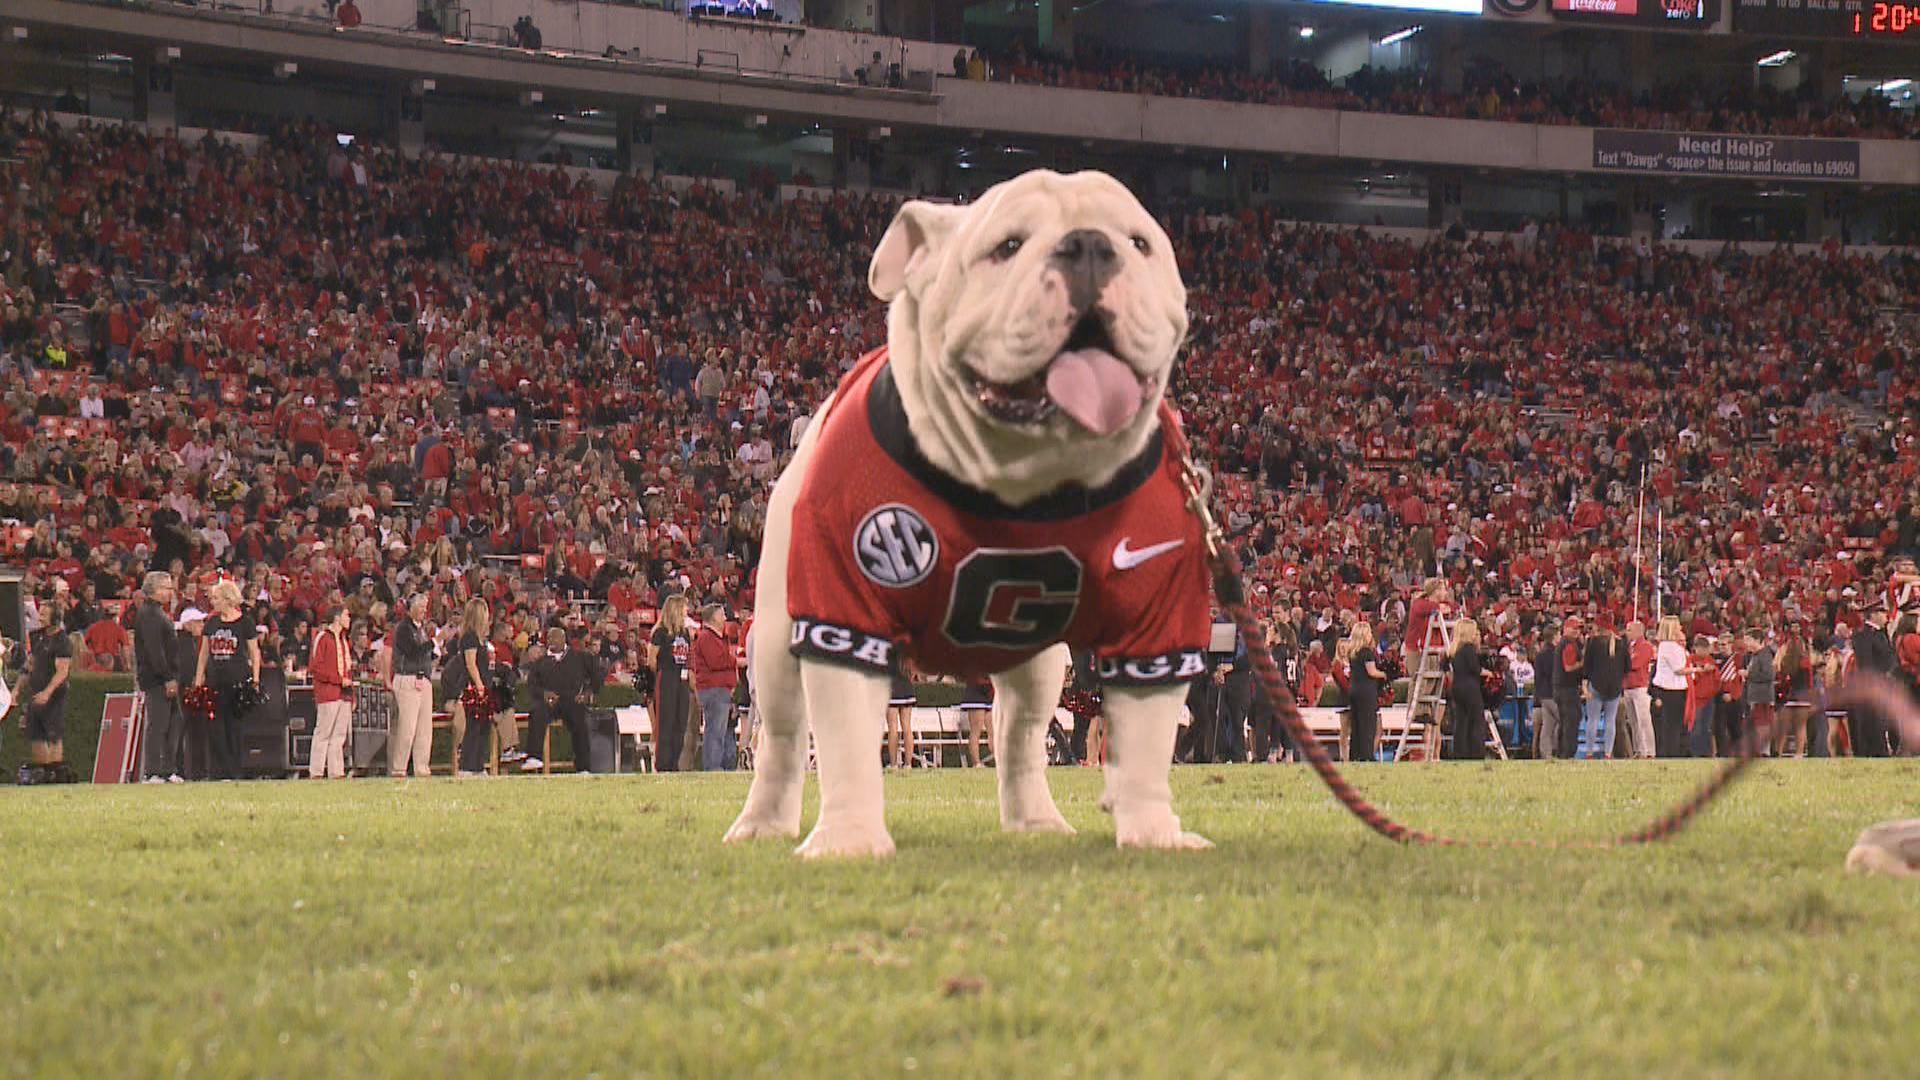 Que to take over as Uga X during the Georgia Southern game